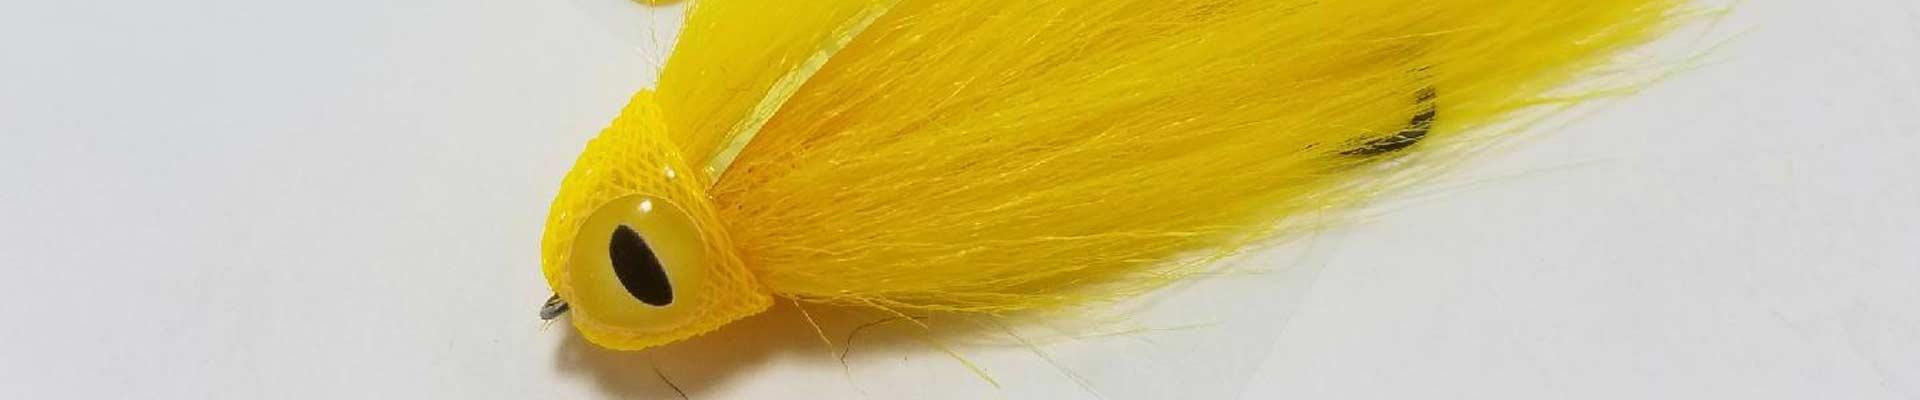 Hair for Cold Water River Bronzebacks | The Ultimate Bass Fishing Resource  Guide® LLC